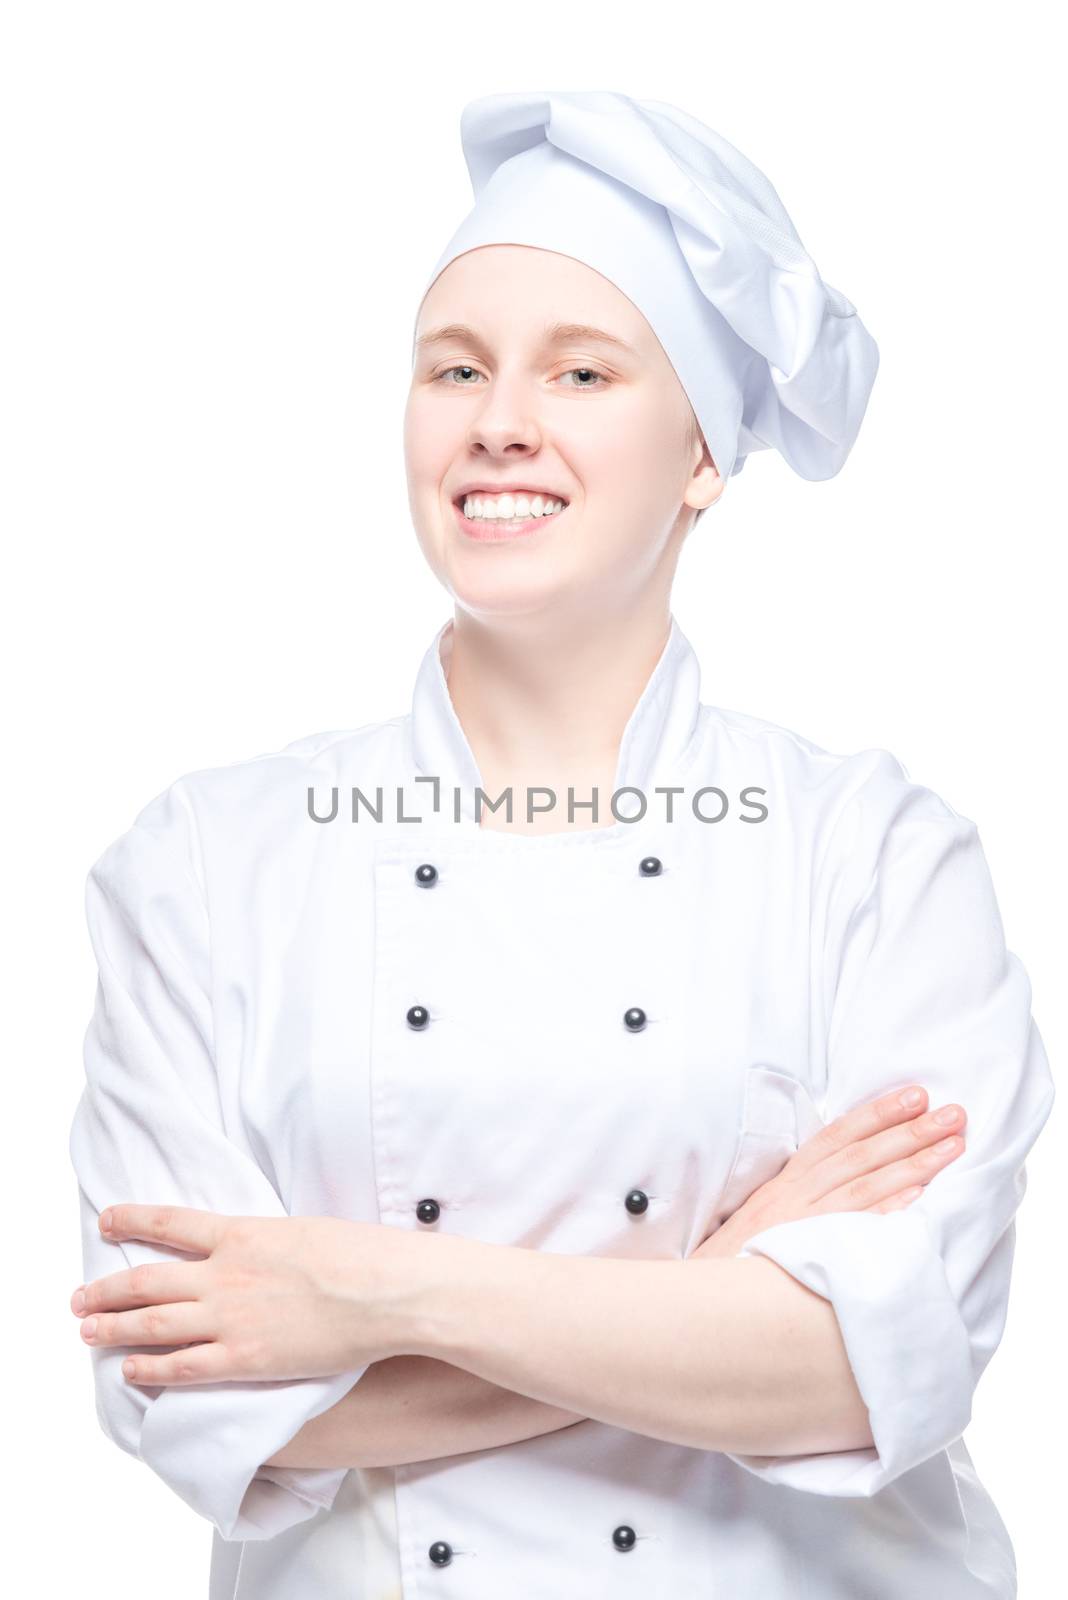 confident woman chef in uniform portrait isolated on white background